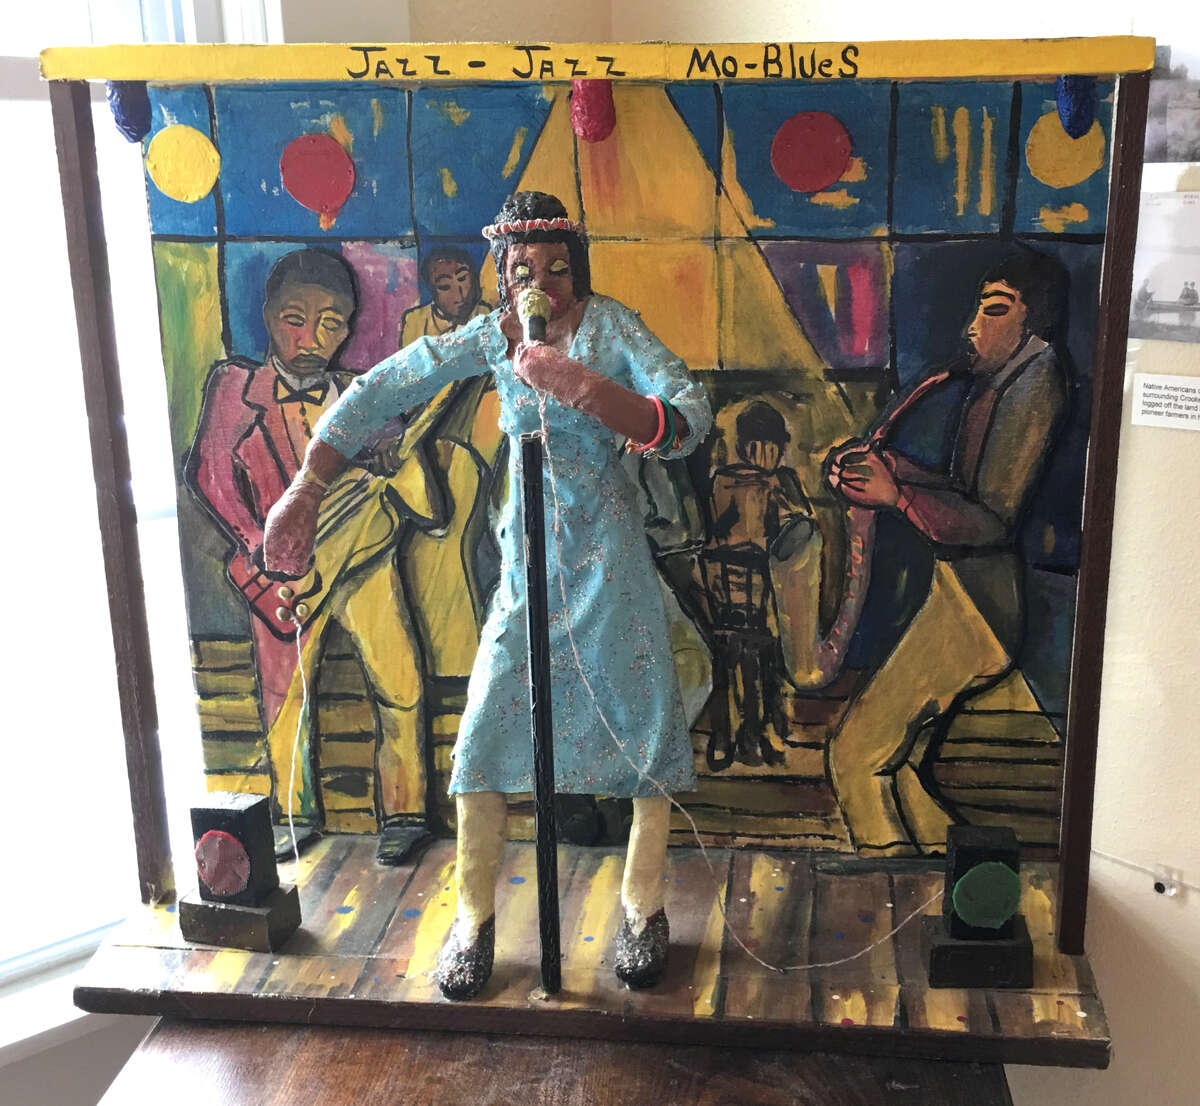 George Thomas' sculpture Jazz-Jazz Mo-Blues is his interpretation of the entertainment found in during the hey days of Idlewild. It will be on display at the Ramsdell Hardy Hall Gallery through Feb. 25